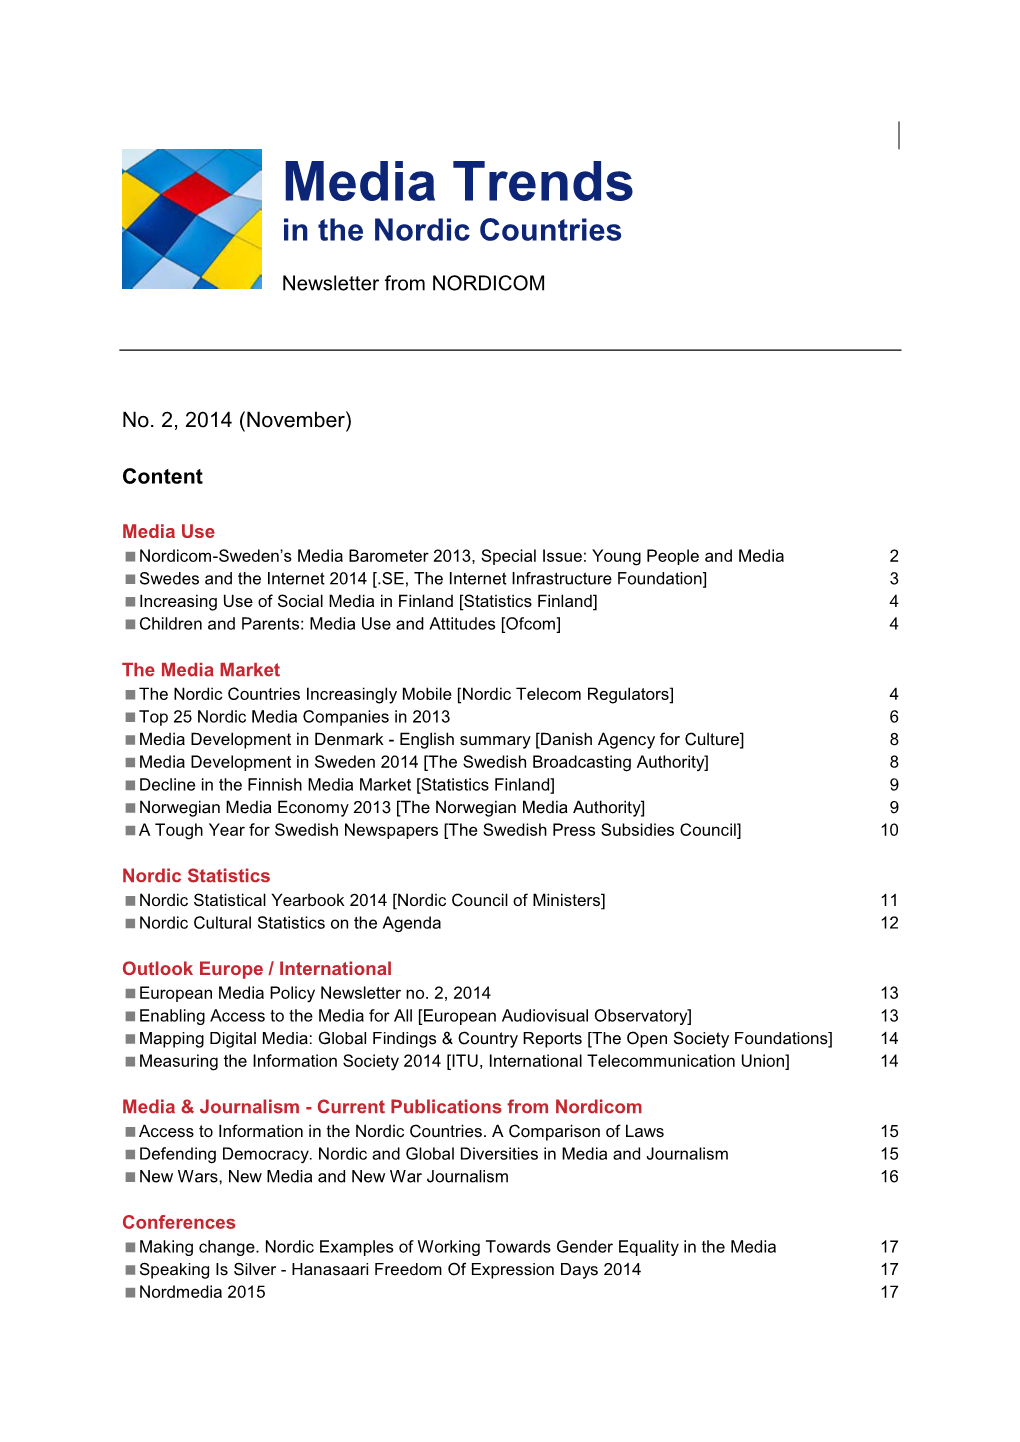 Media Trends in the Nordic Countries